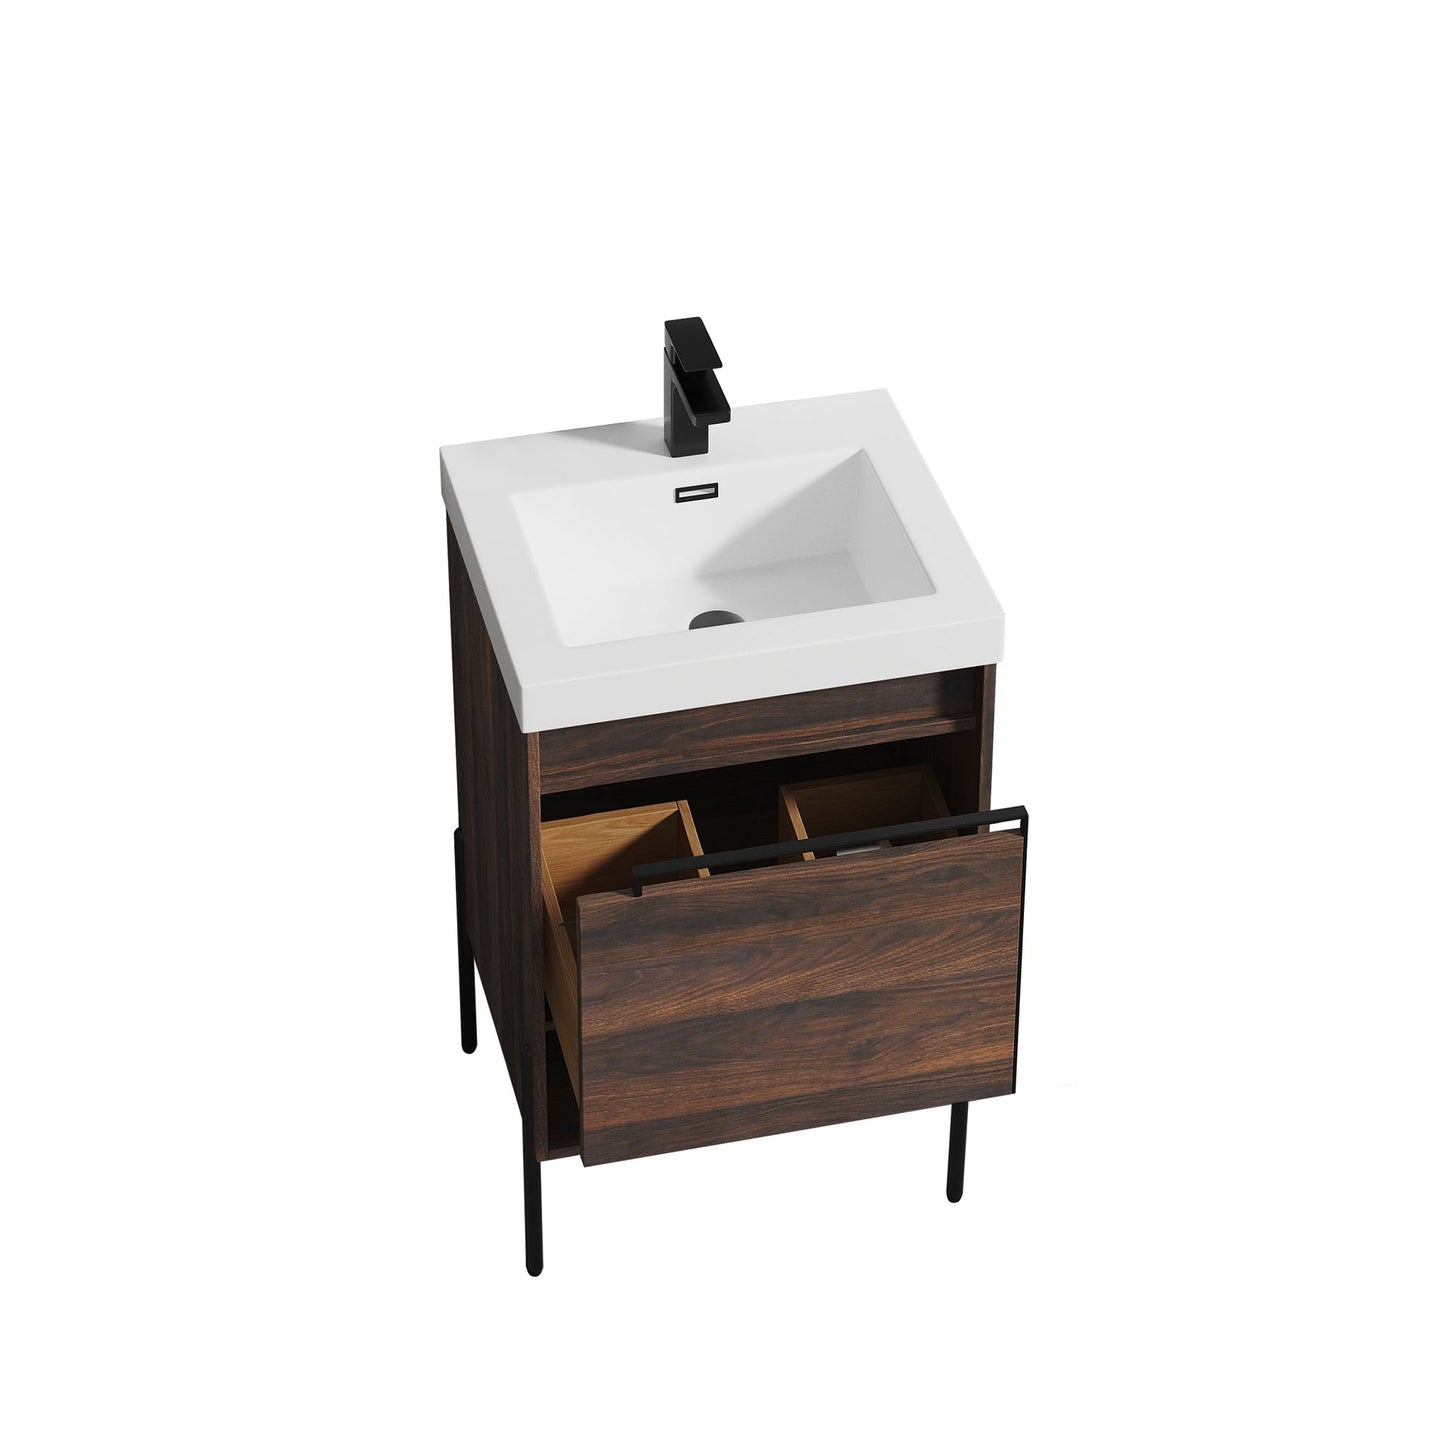 Blossom Turin 20" 1-Drawer Cali Walnut Freestanding Single Vanity Base With Open Shelf, Handle and Legs